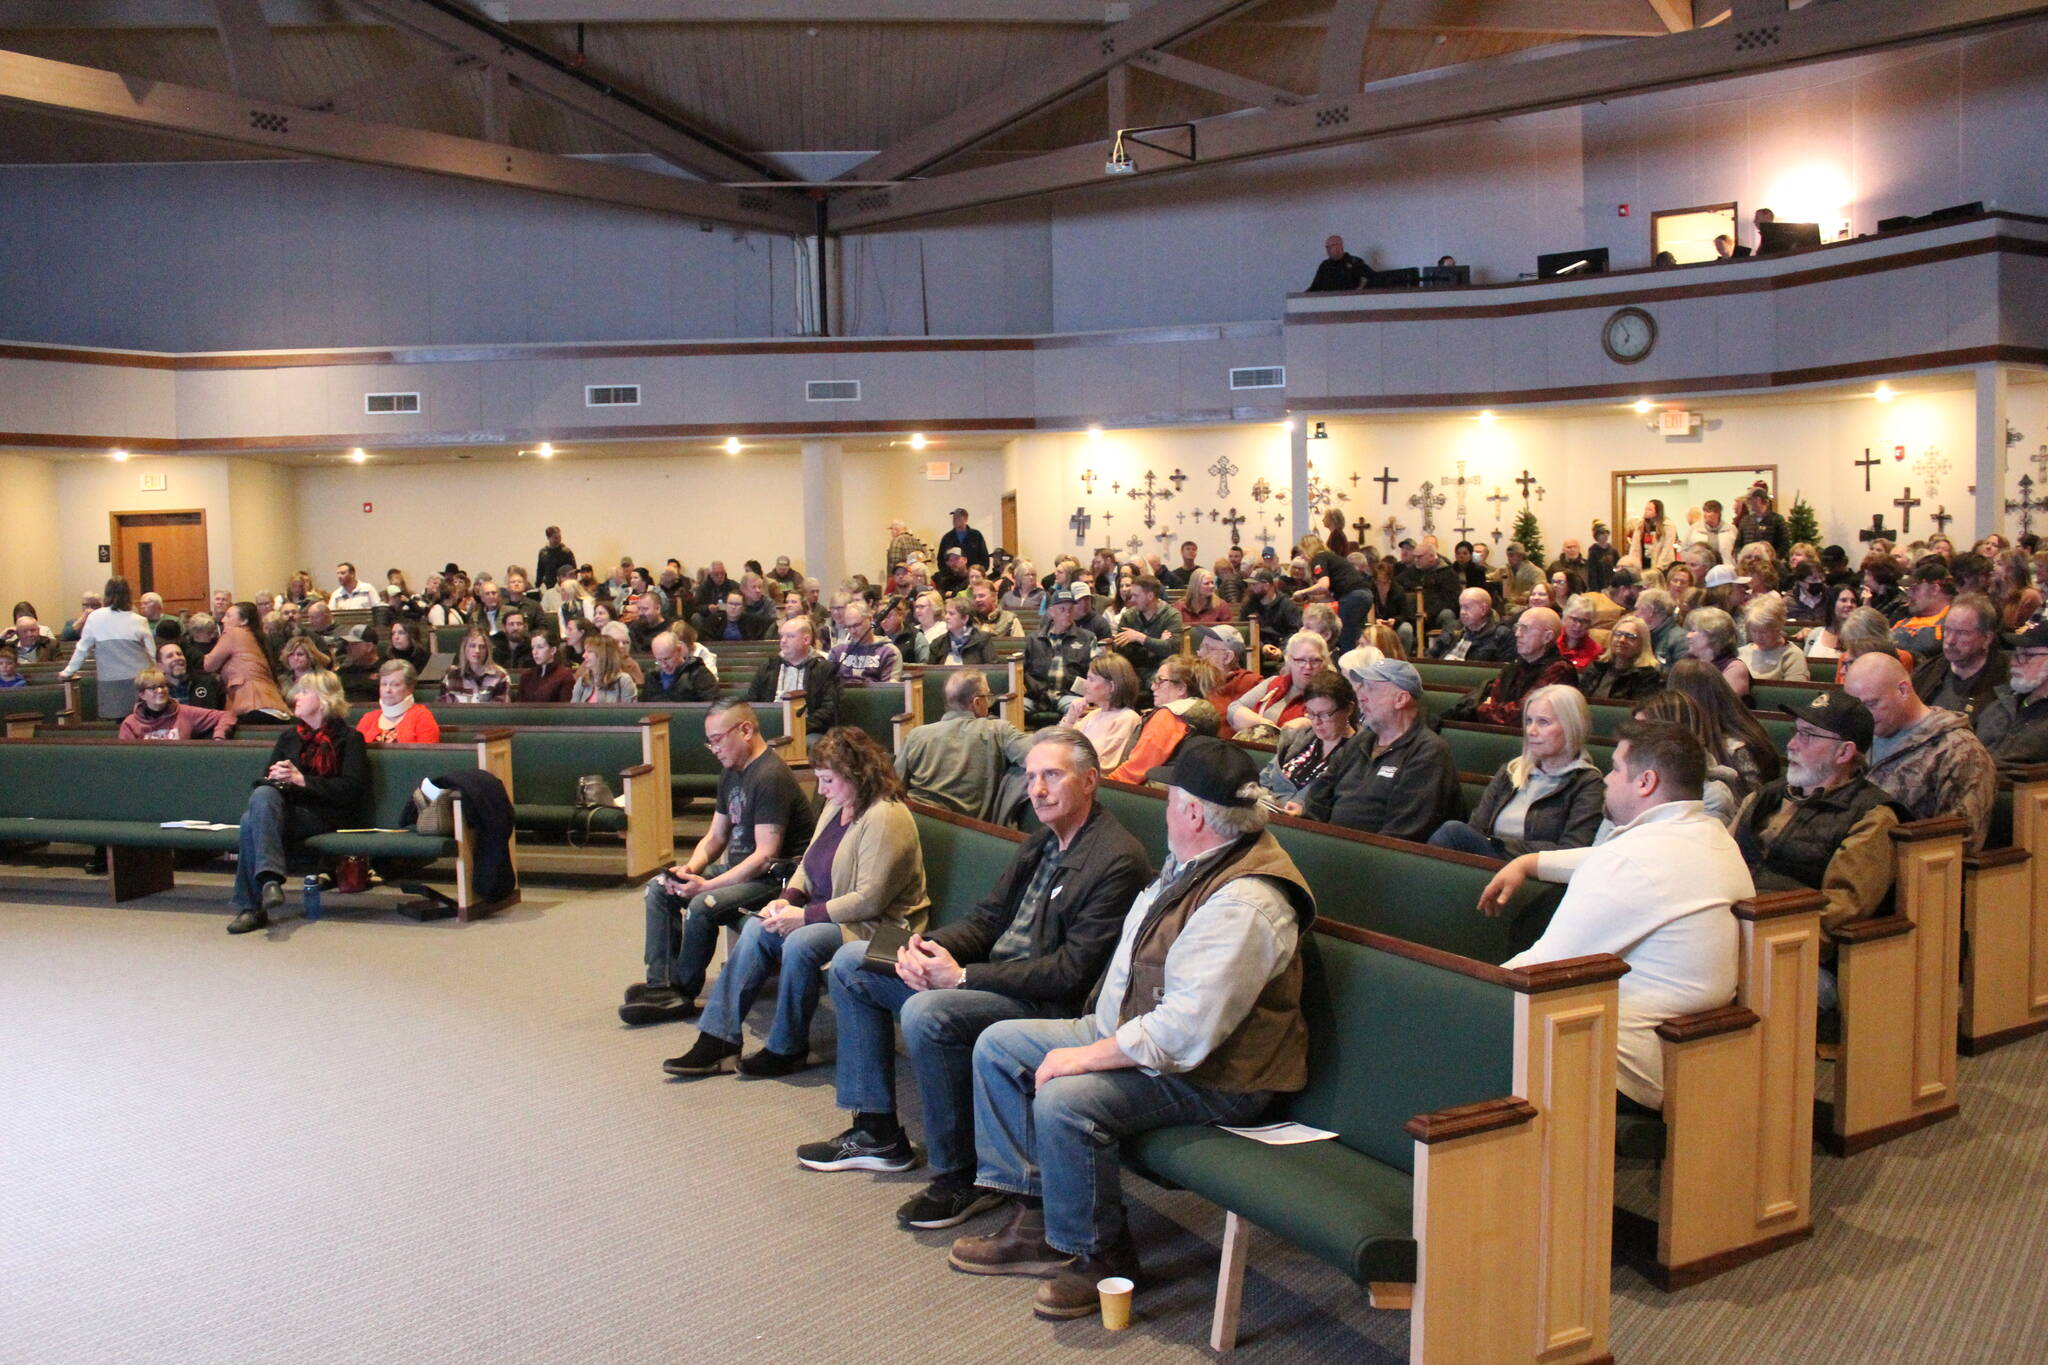 Hundreds of concerned citizens attended last week’s meeting about Garden House, the Less Restrictive Alternative group home for Level 3 sex offenders being released from McNeil Island to Garden House, operating outside the city of Enumclaw. Photo by Ray Miller-Still